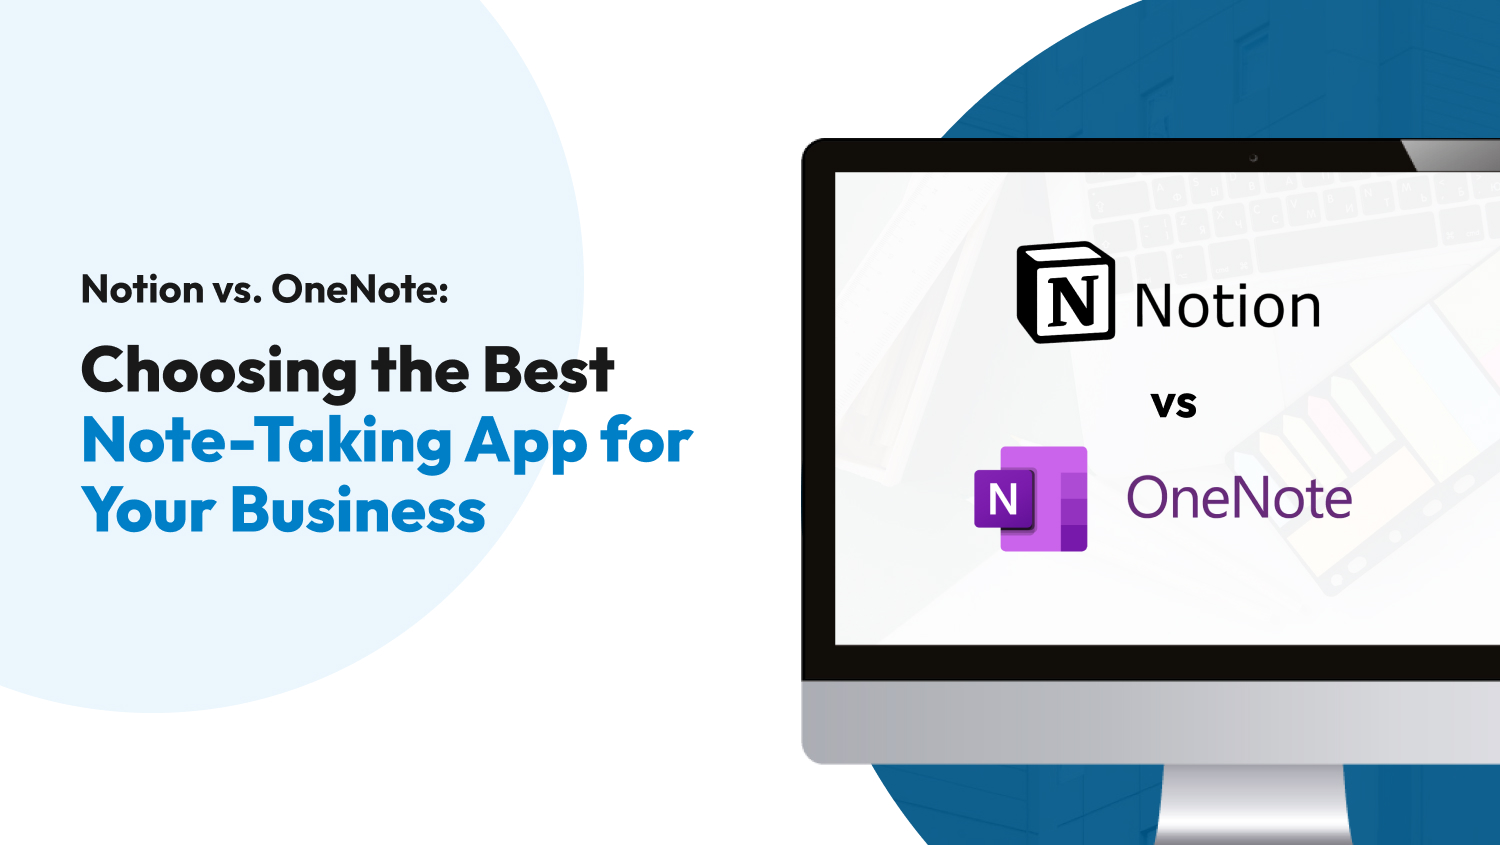 Notion vs. OneNote: Choosing the Best Note-Taking App for Your Business